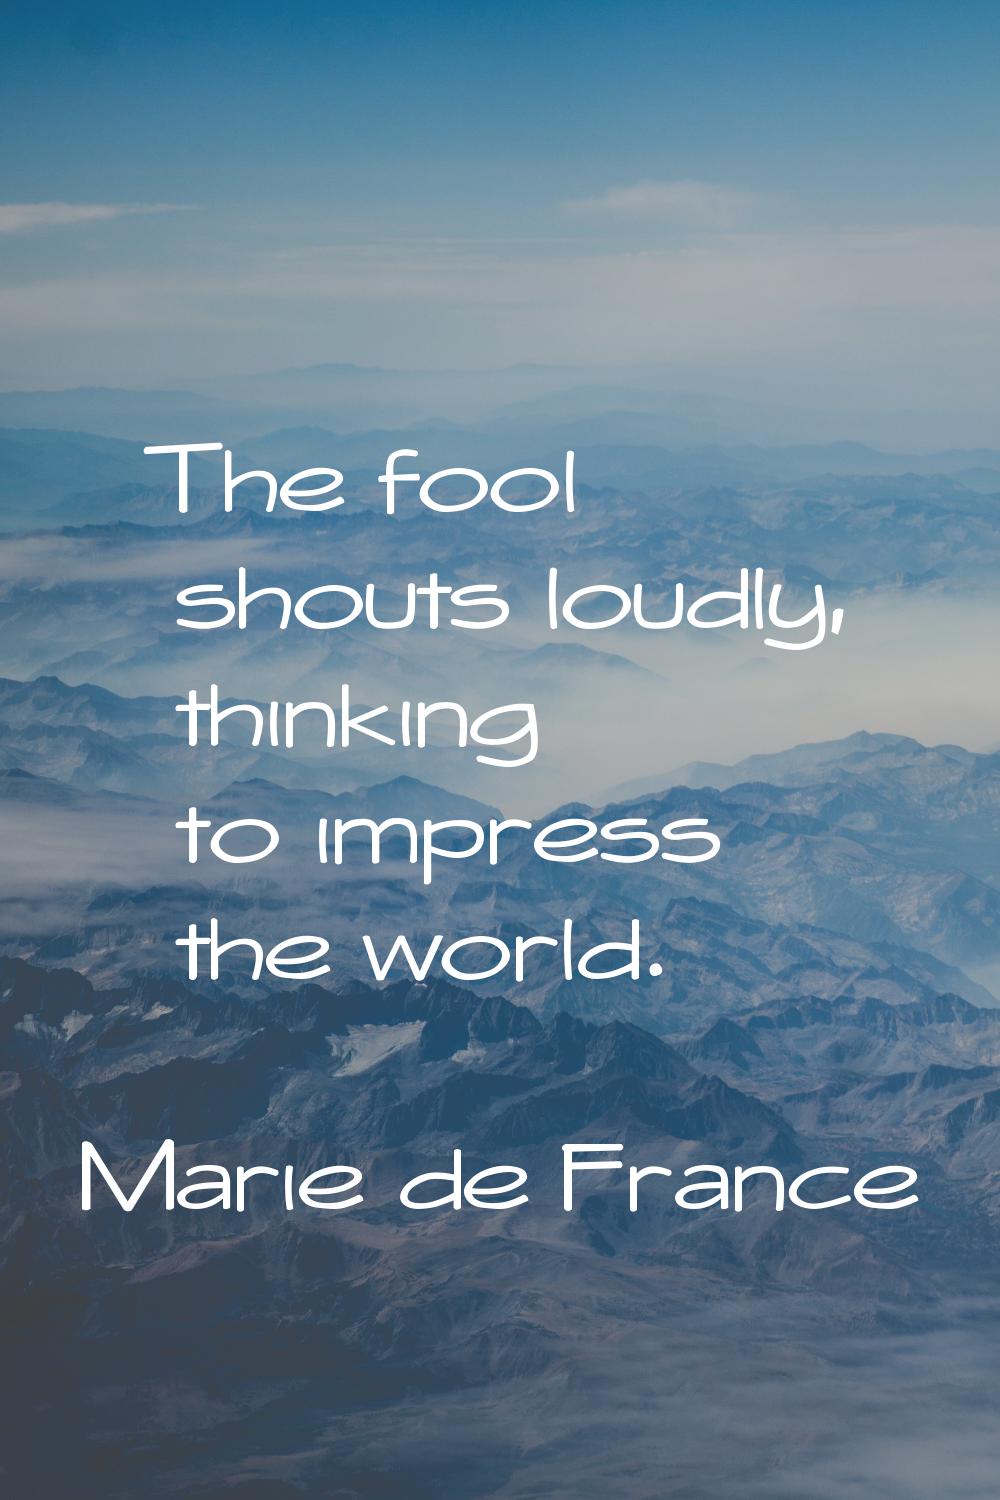 The fool shouts loudly, thinking to impress the world.